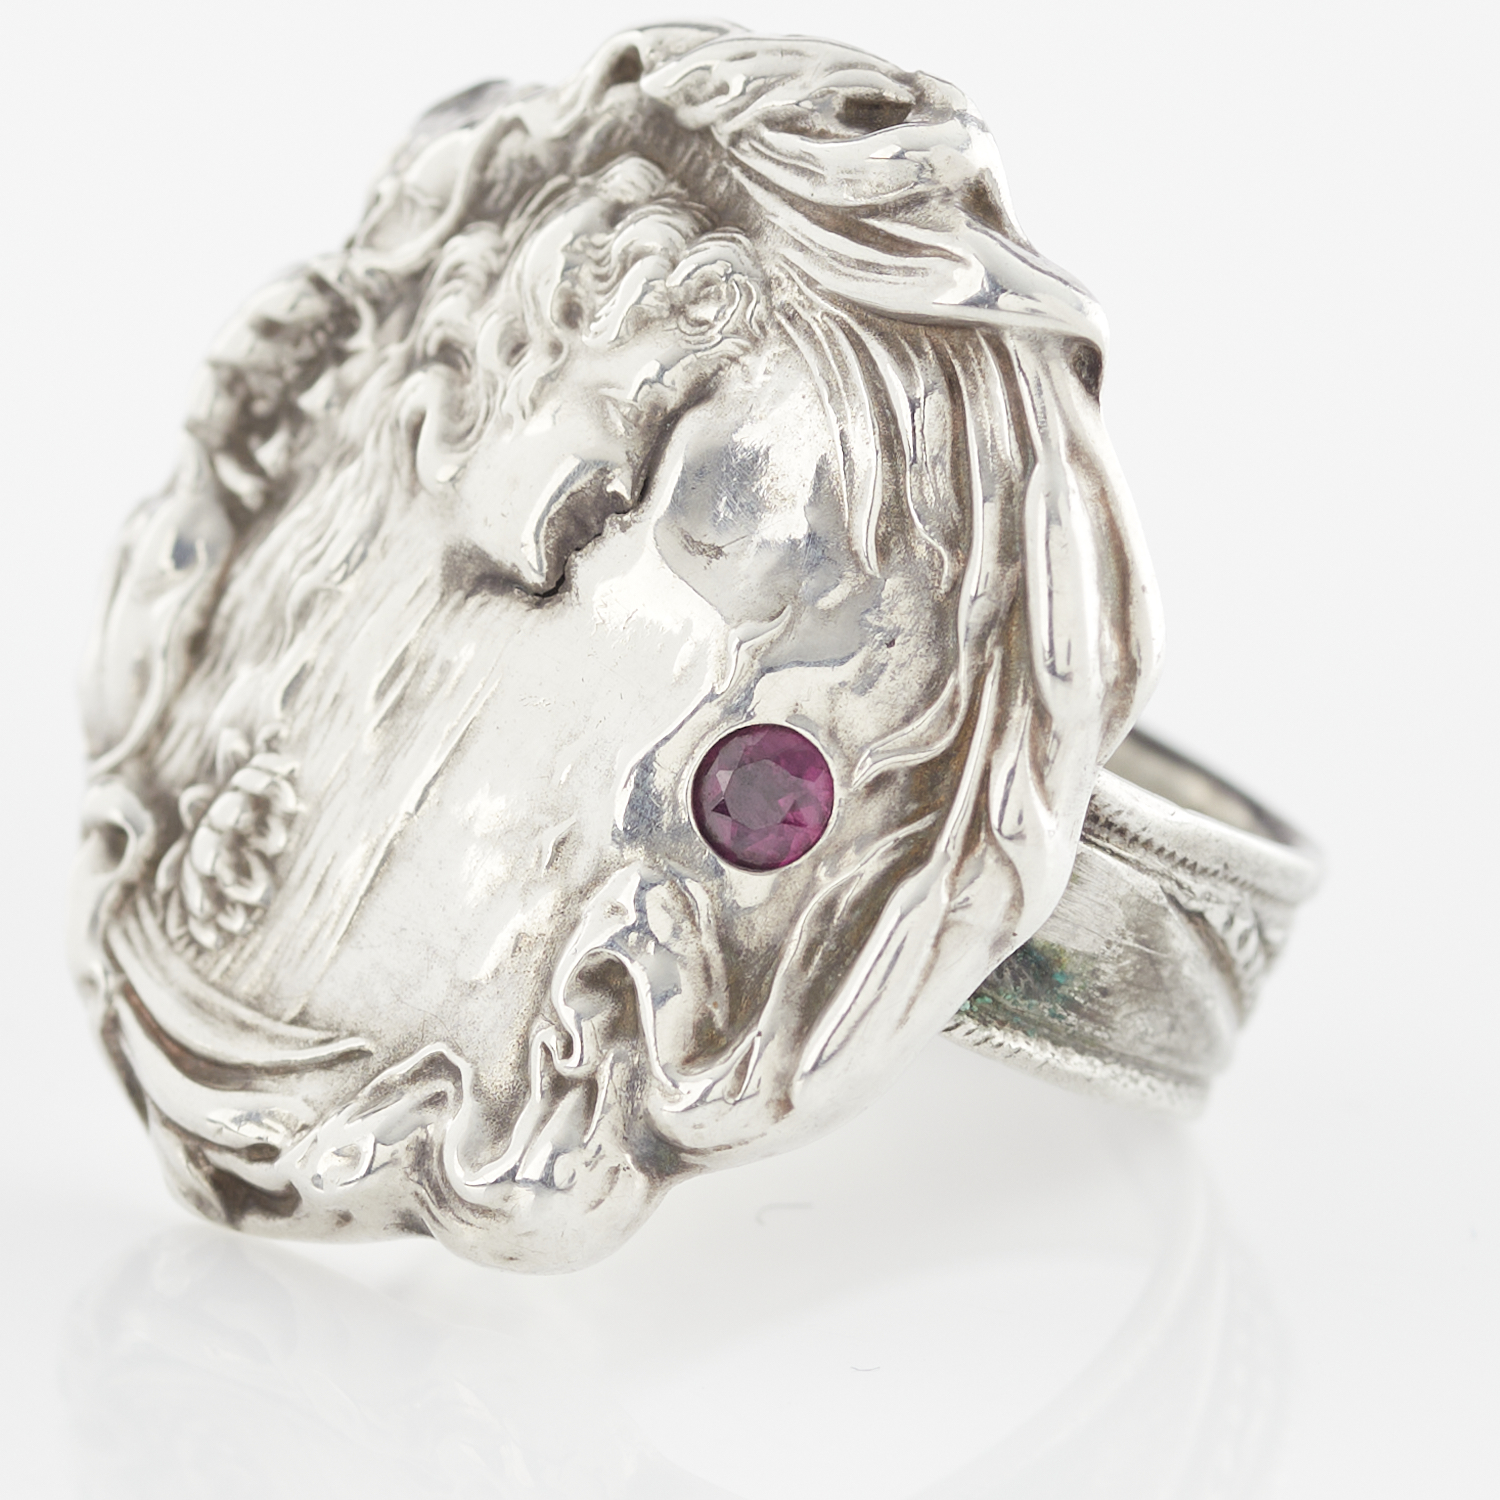 Sterling Silver Art Nouveau Medallion Ring - Image 11 of 13